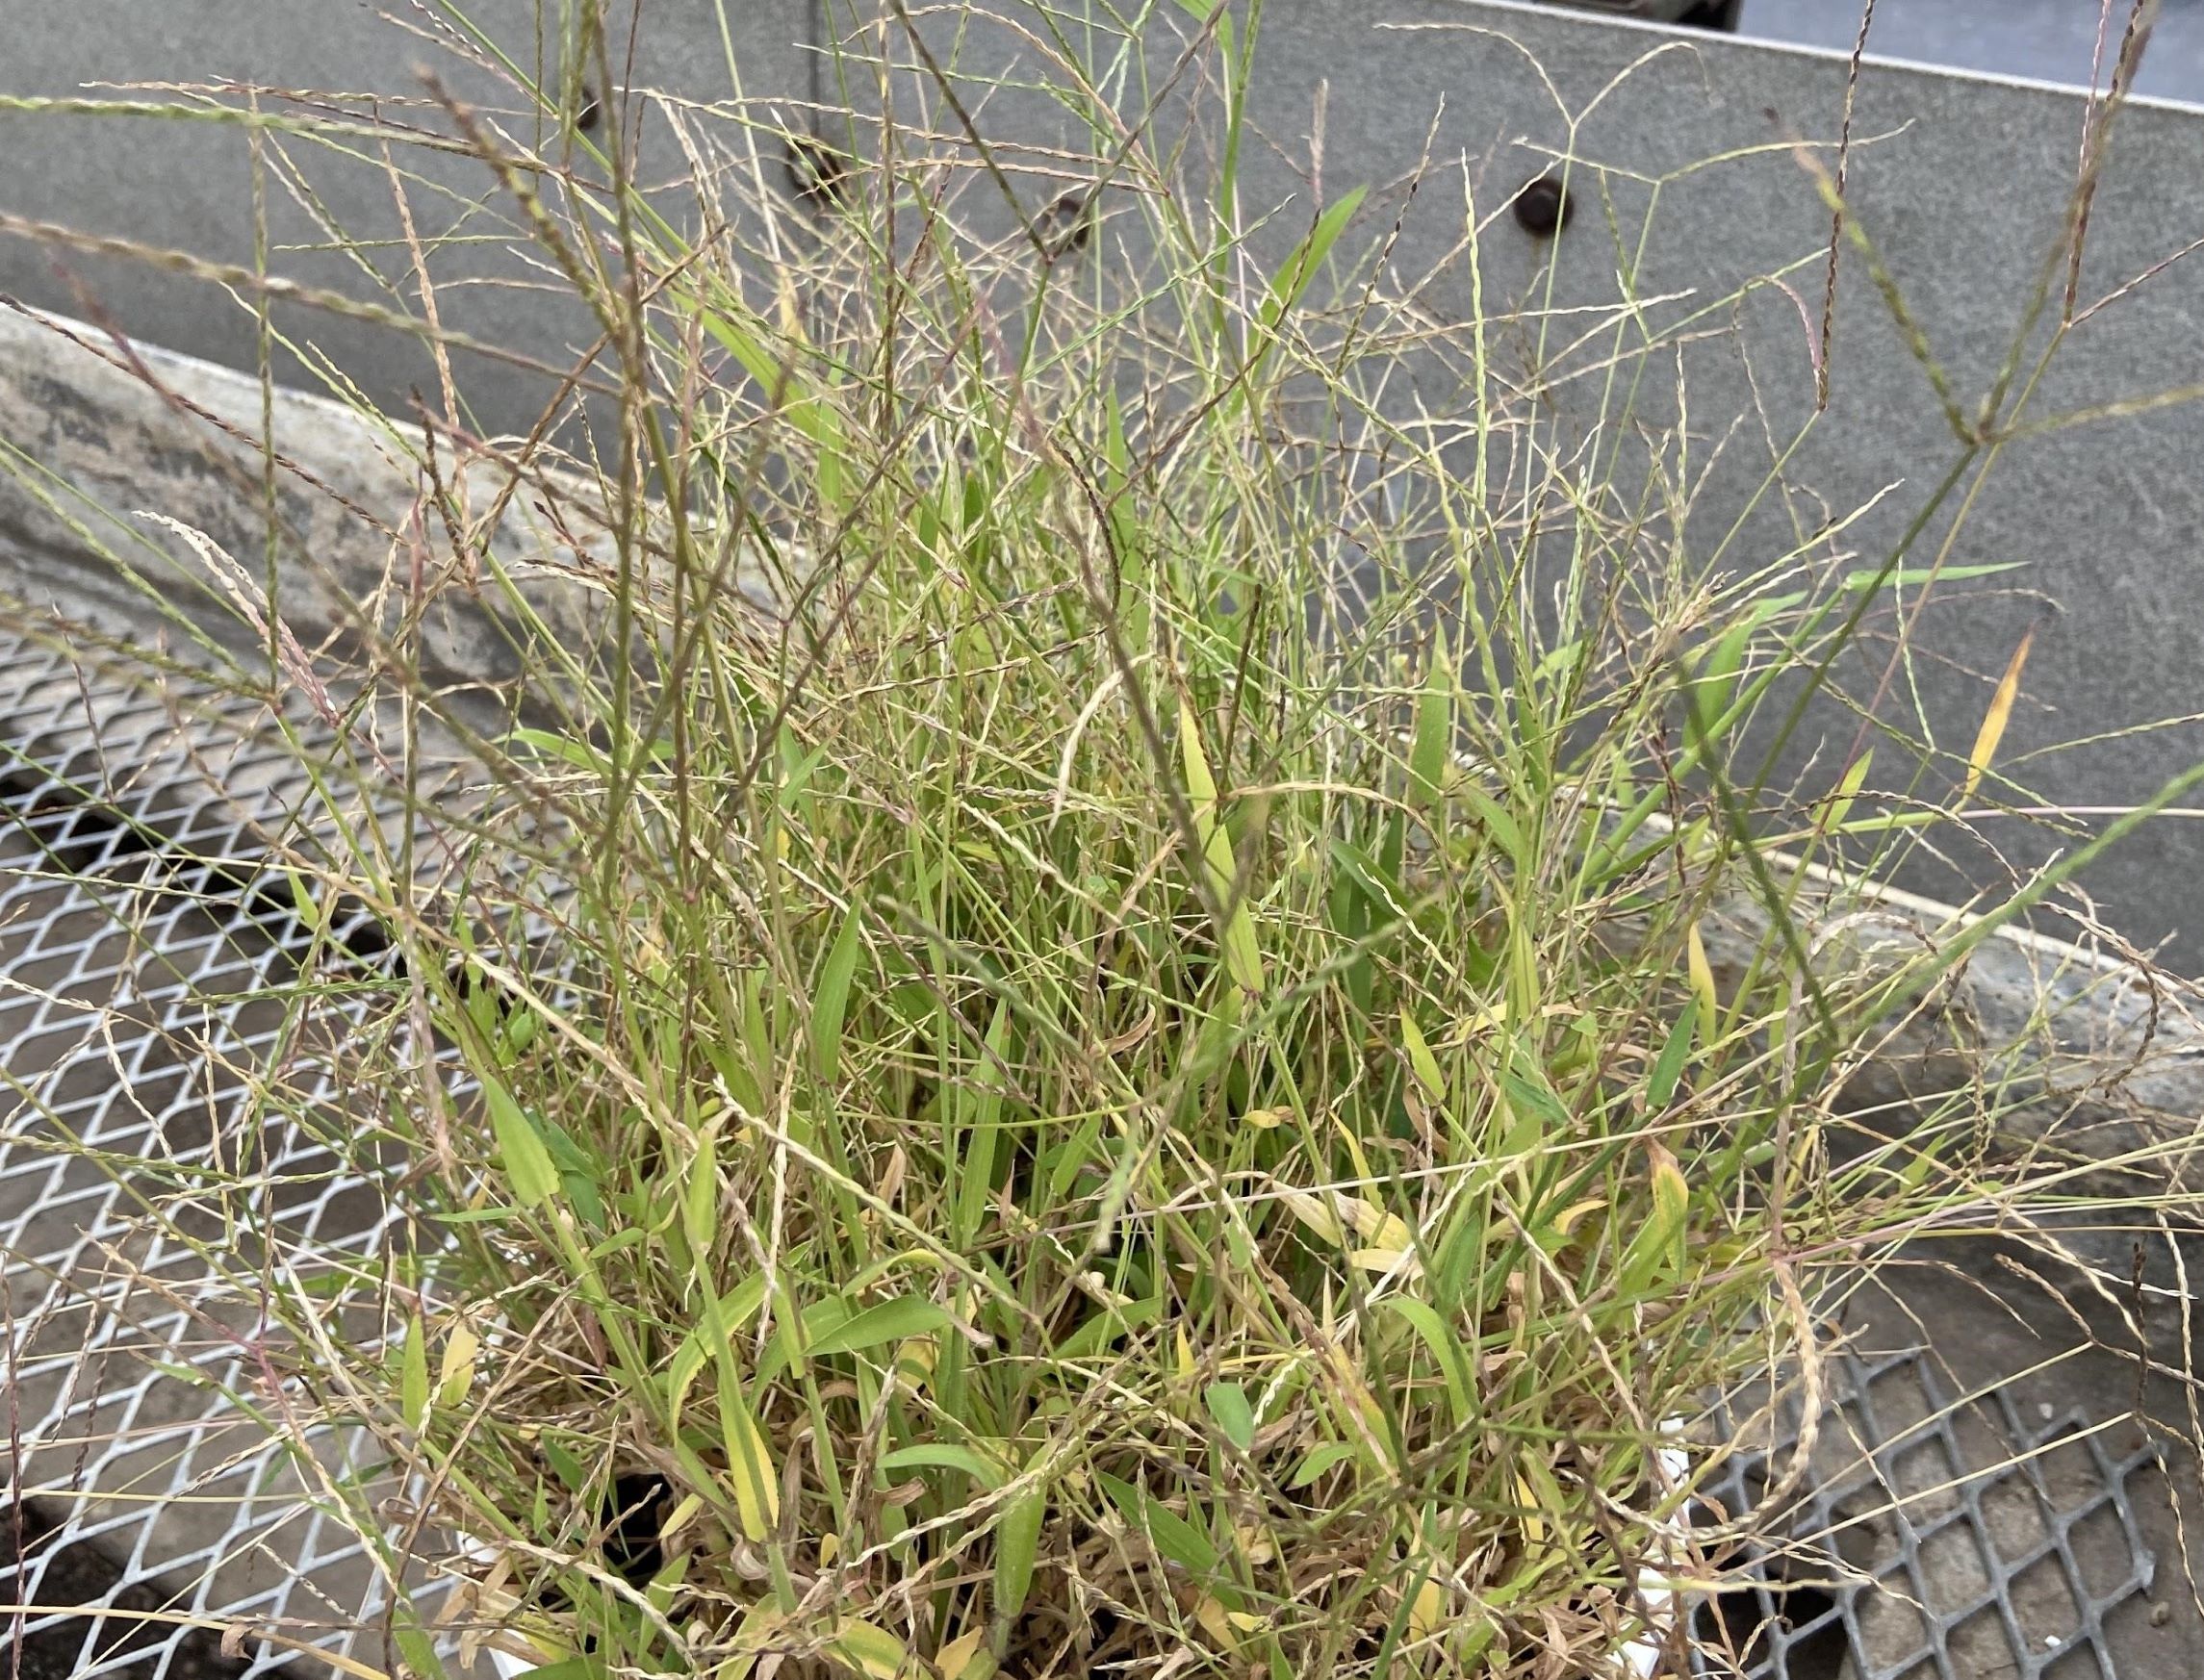 a pot of a grassy weed plant growing in the greenhouse